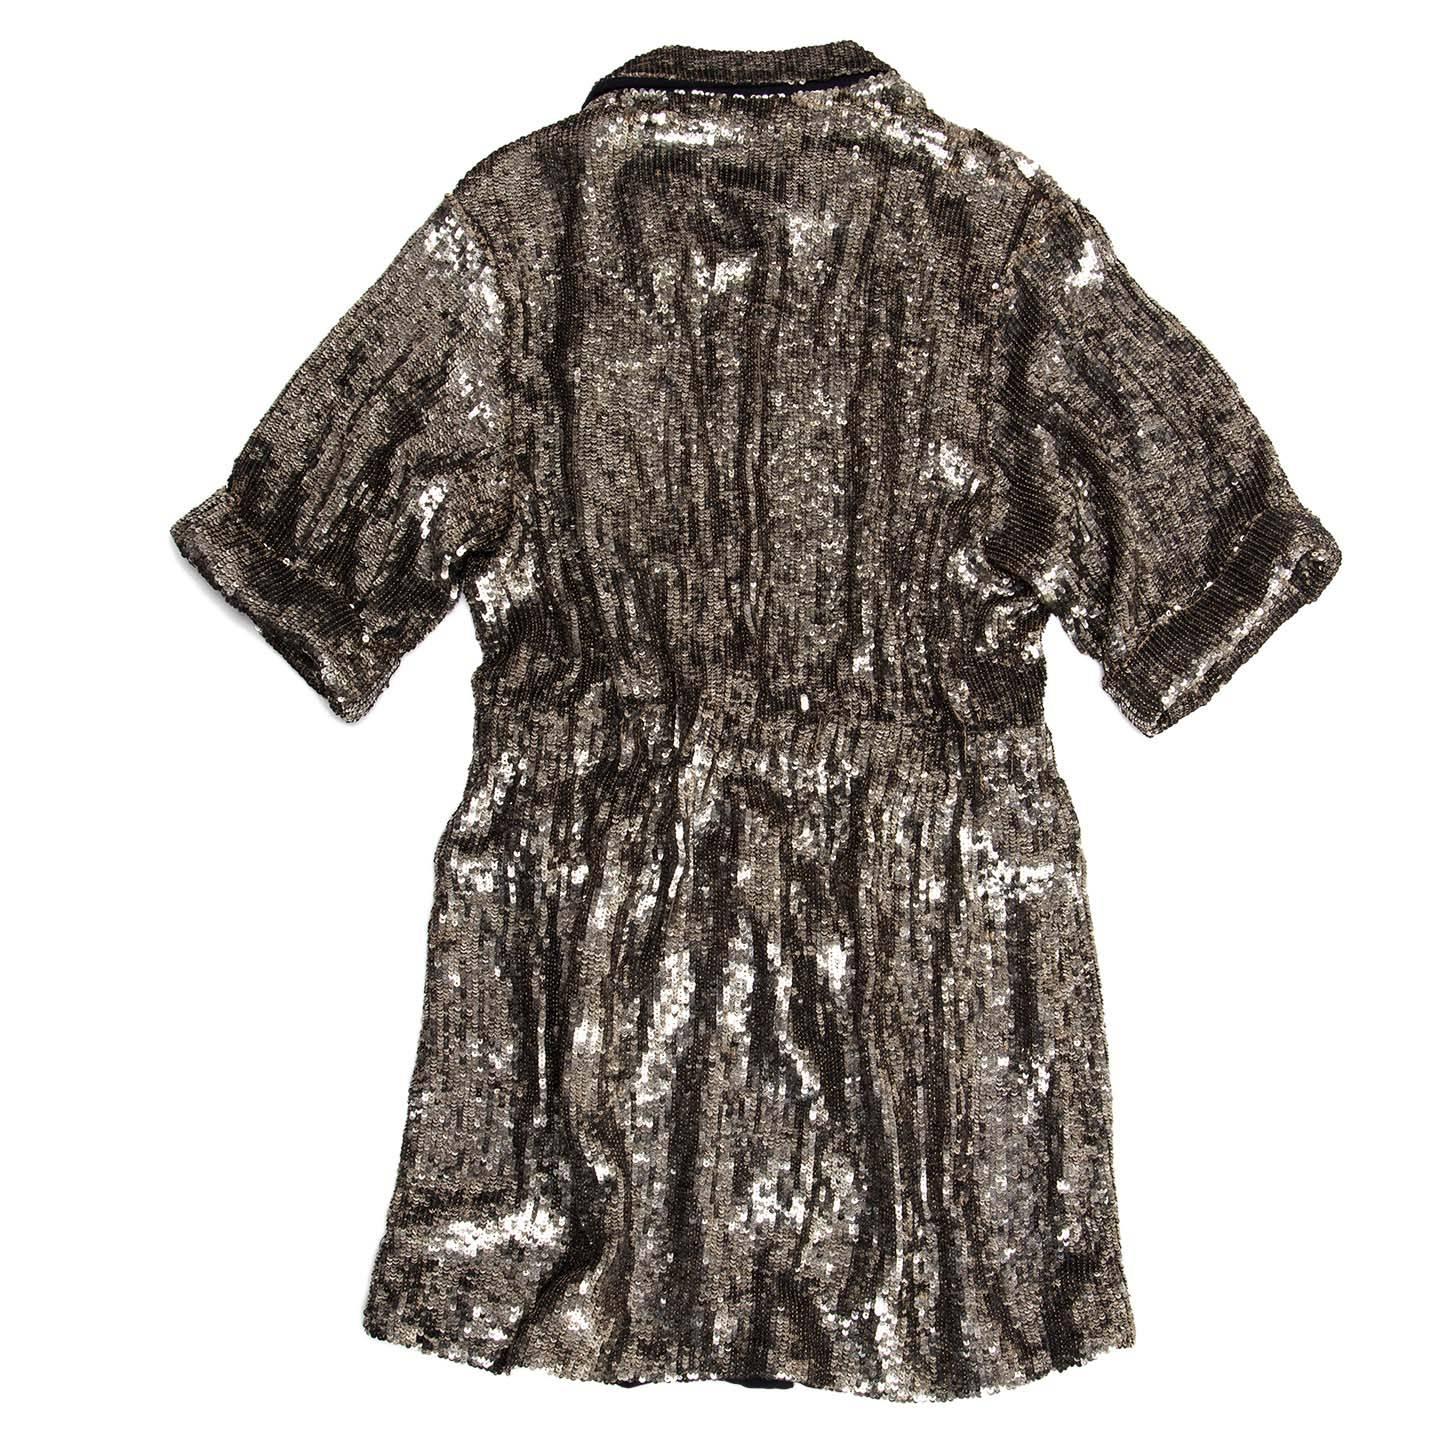 Stunning matt silver fully sequined dress coat with double breasted front closing, slightly gathered waist and short sleeves with turn-ups. The dress has a blazer collar with small lapel, flap pockets and it can be worn as a long jacket too. The